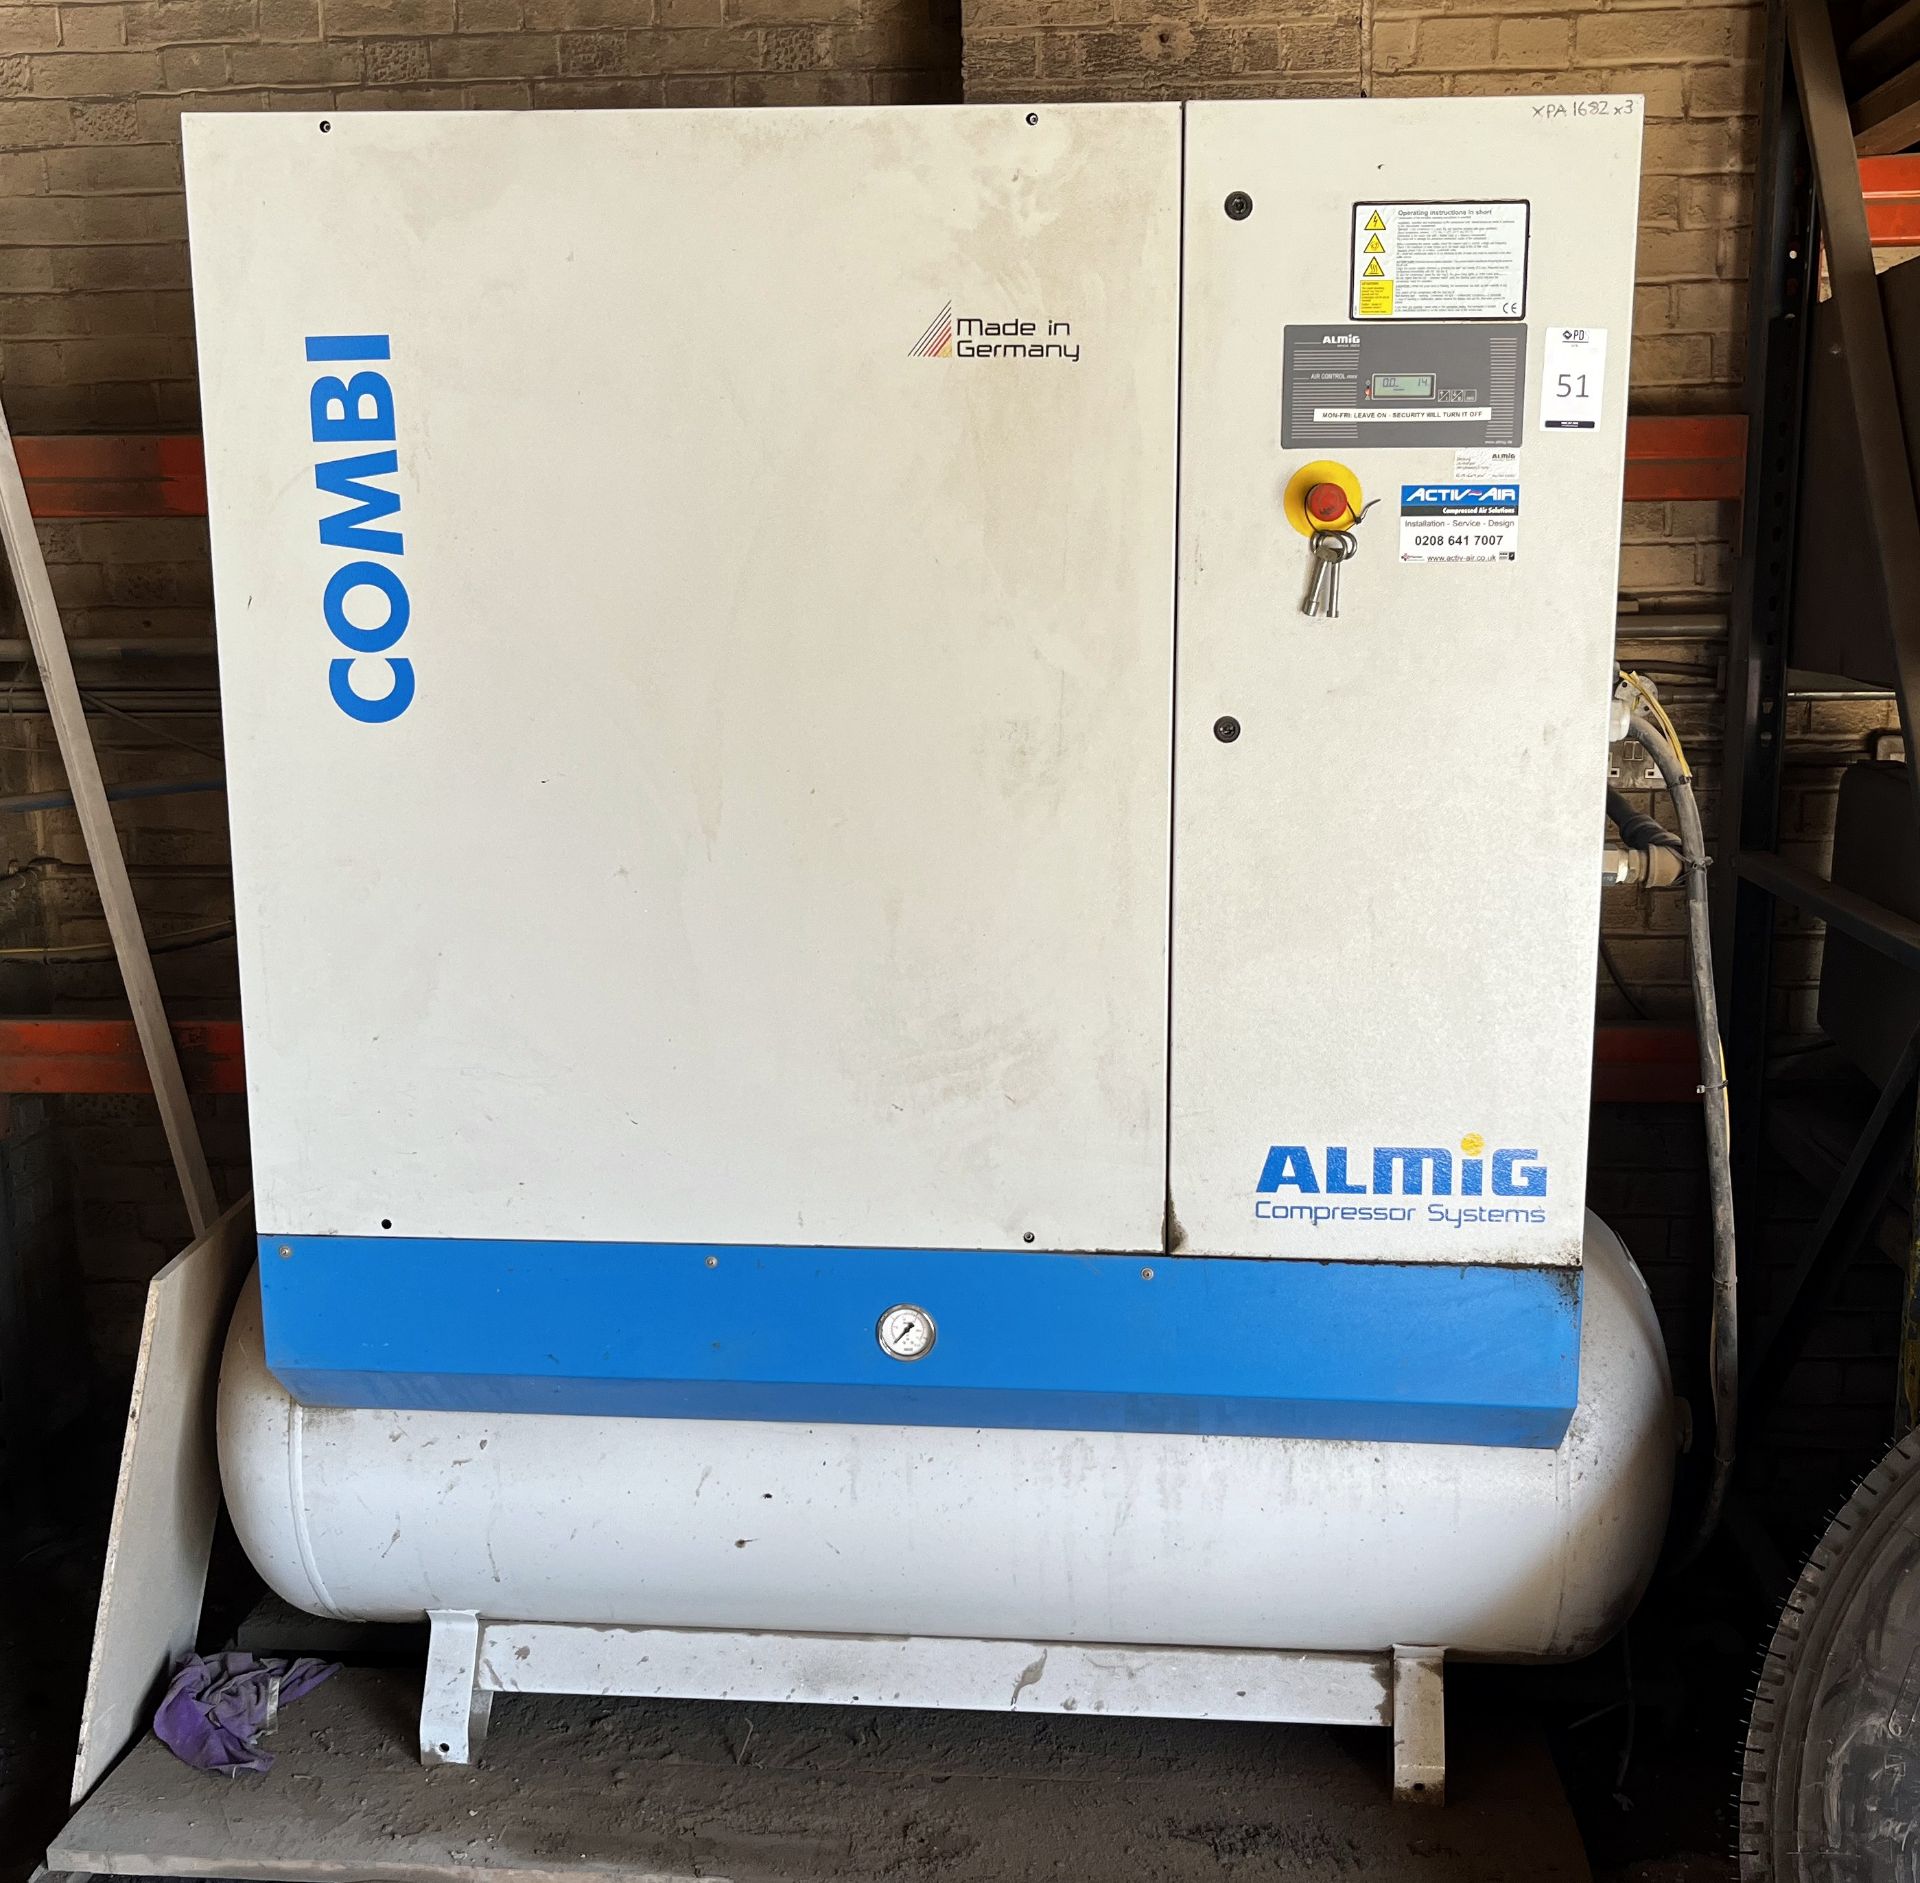 Almig Compressor Systems Combi Air Compressor on Welded Receiver Base, 767 hours